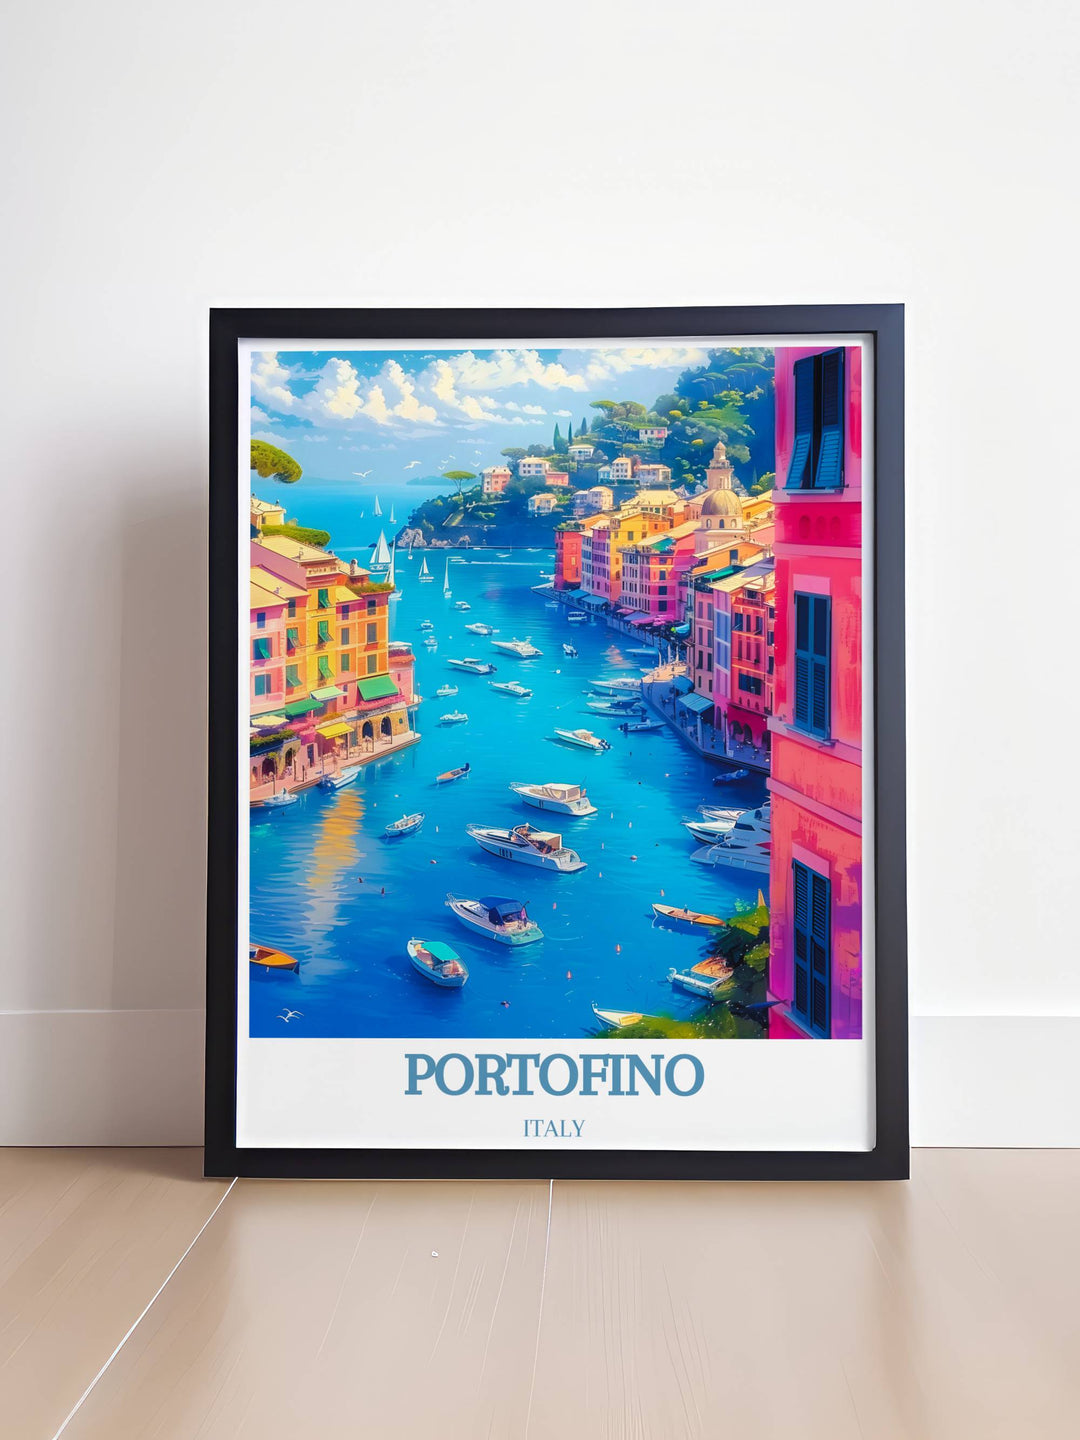 A beautiful Portofino Home Decor piece highlighting the serene ambiance of the village, with luxurious yachts docked in the harbor and lush gardens in the background.